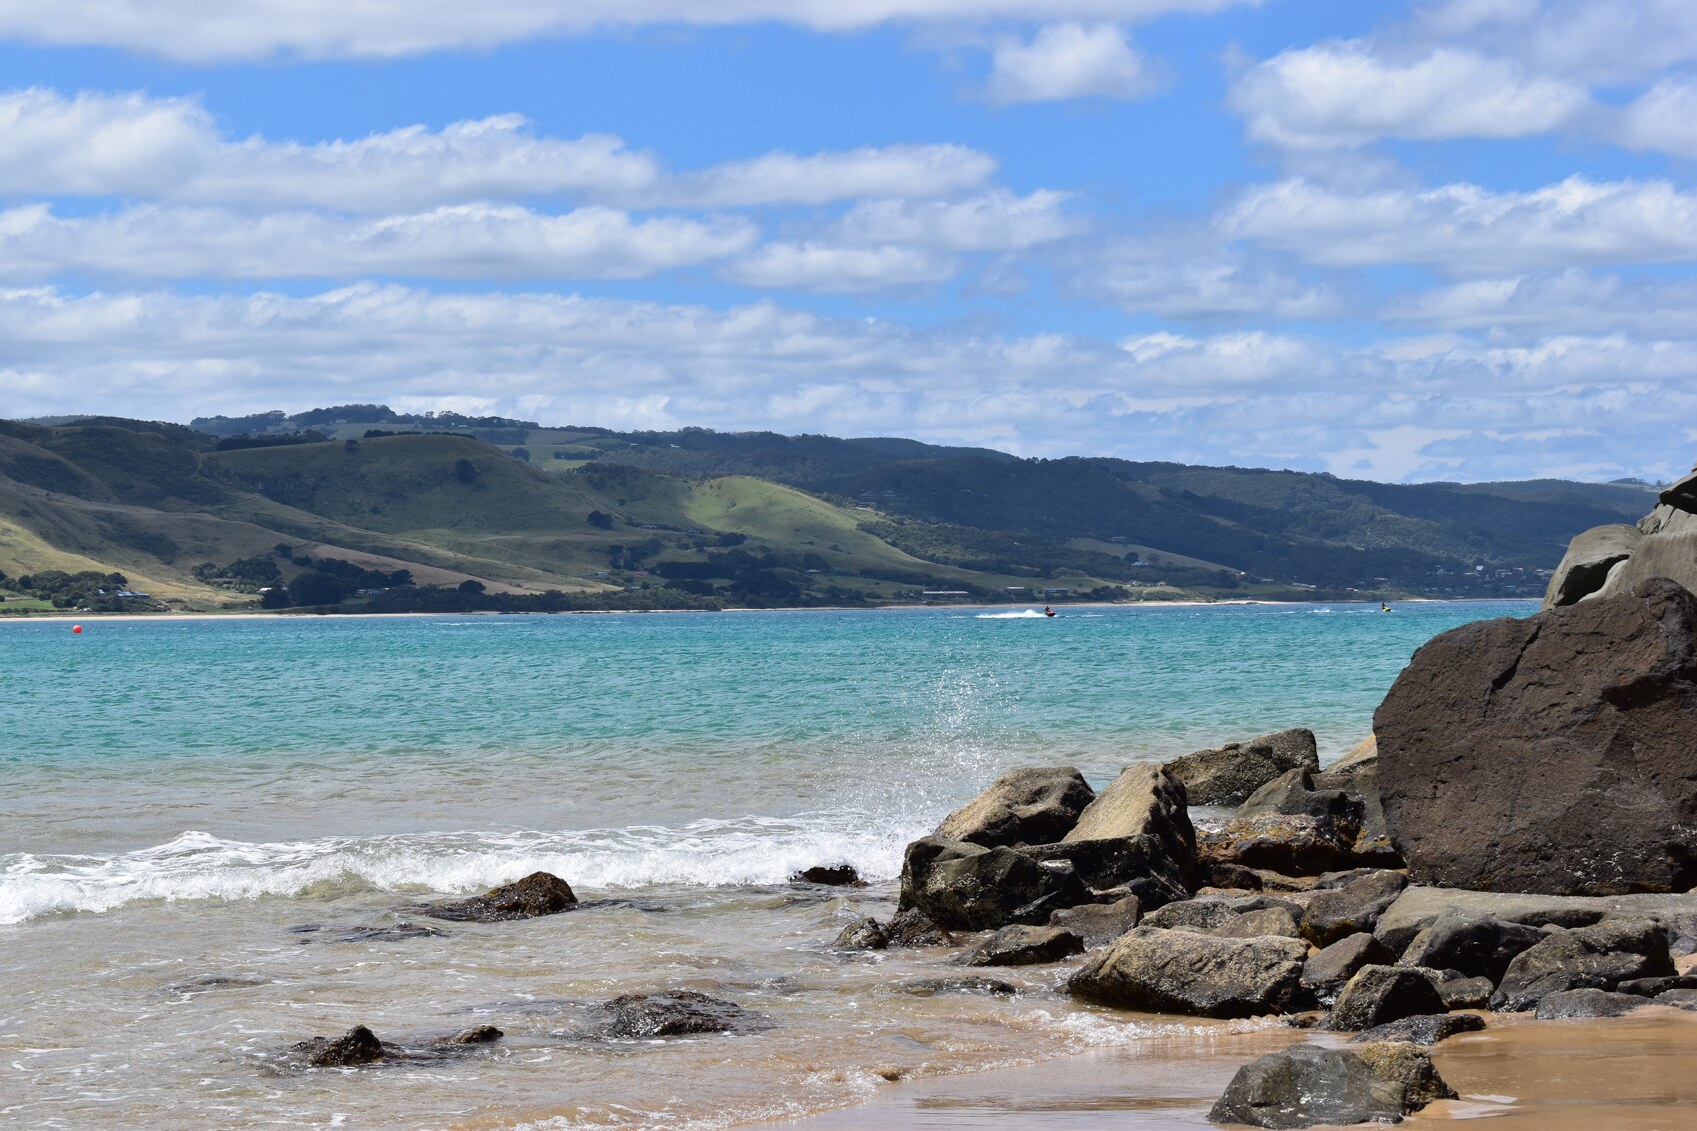 The clear blue water of Apollo Bay, the tourism centre of the Colac Otway Shire